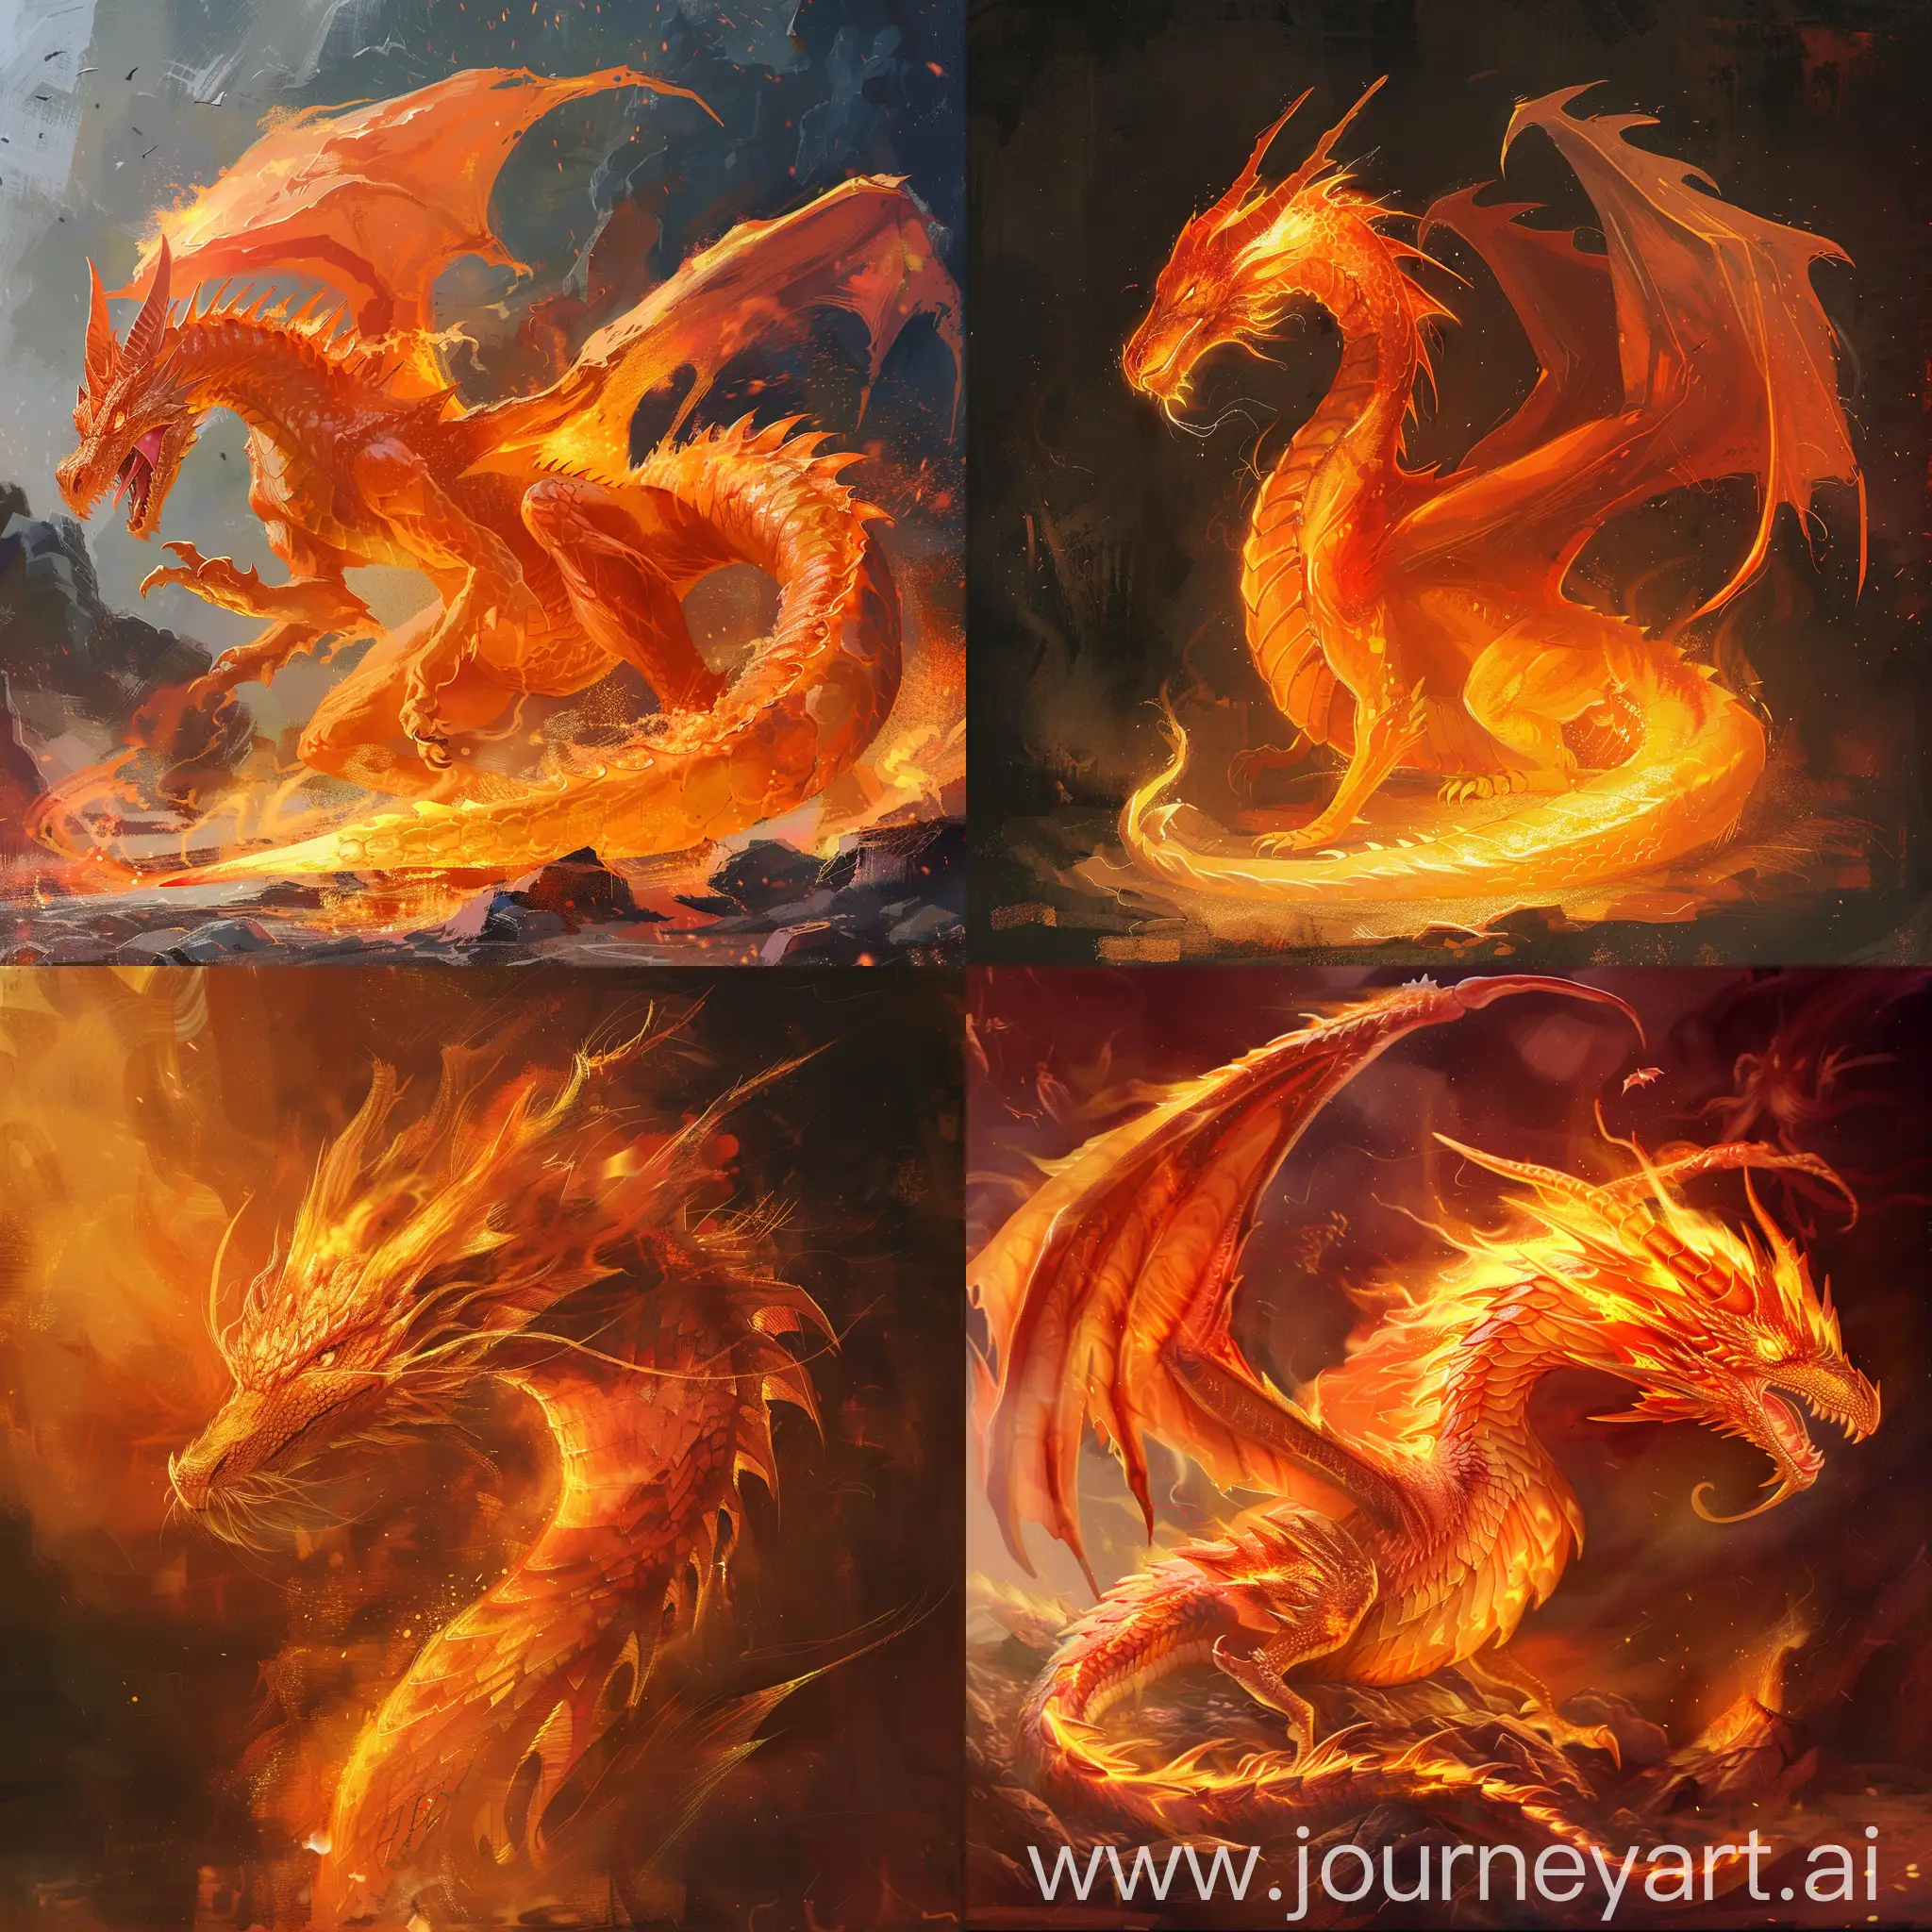 An orange dragon with a red flame